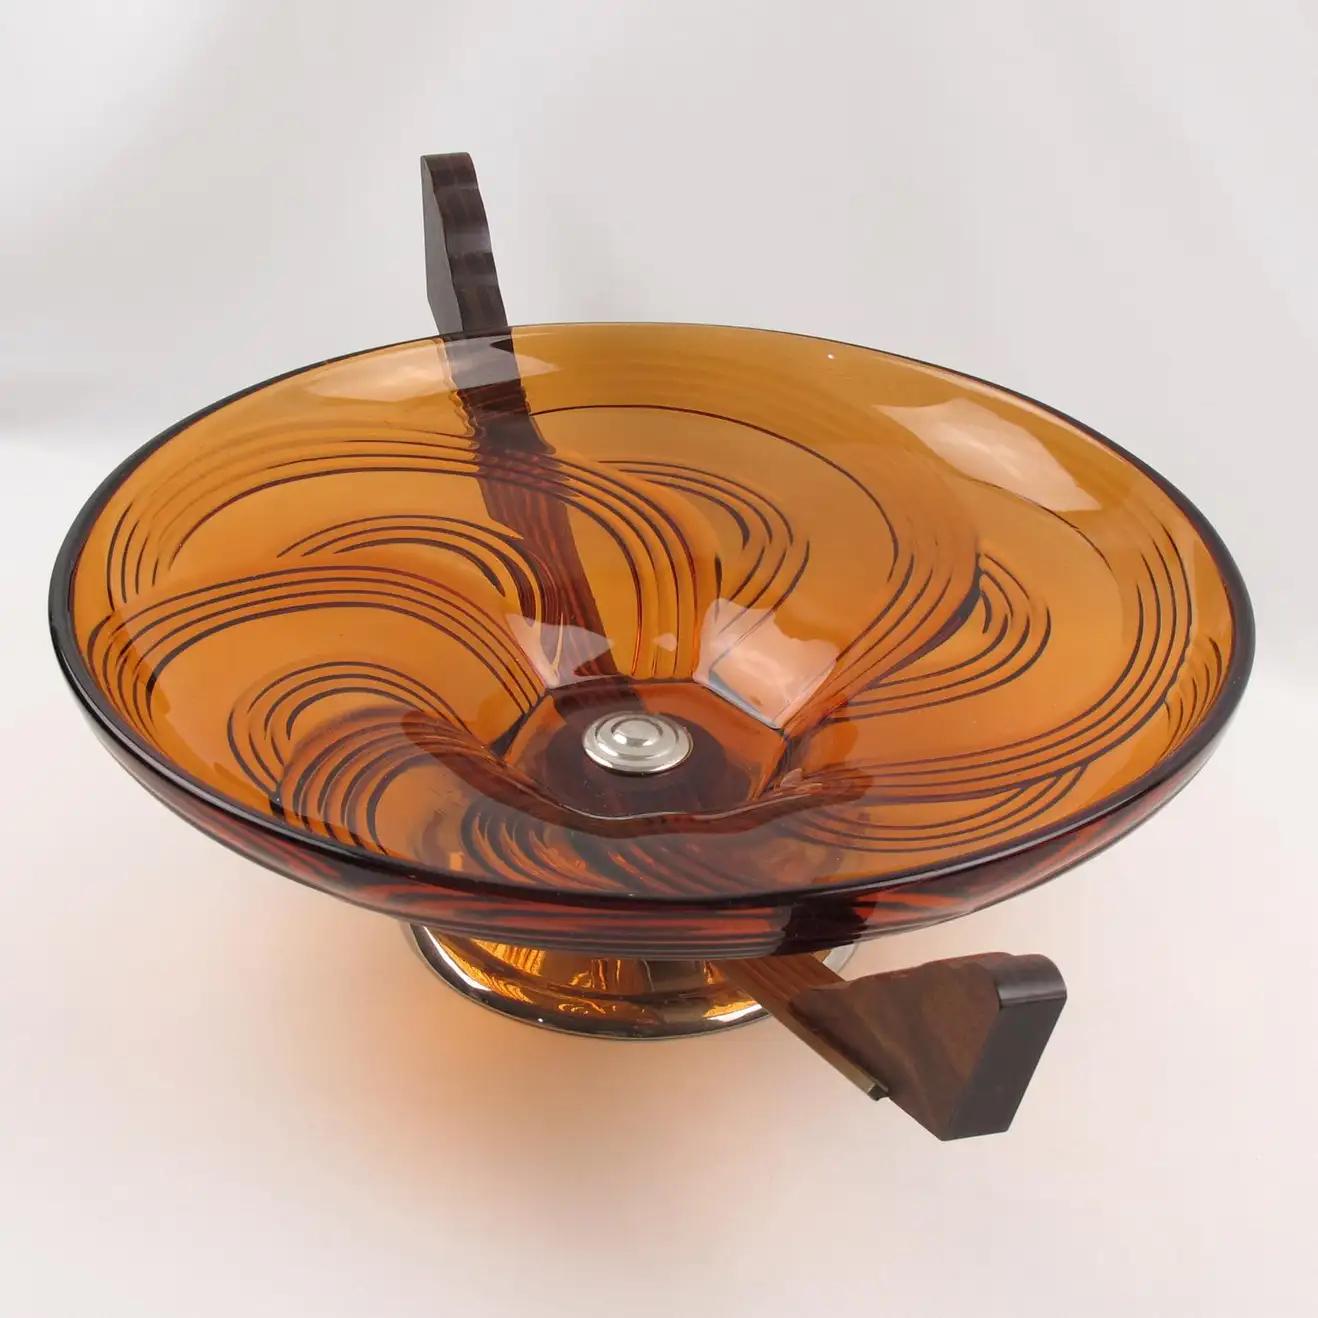 Metal Art Deco Macassar Wood and Glass Centerpiece Bowl, France 1930s For Sale